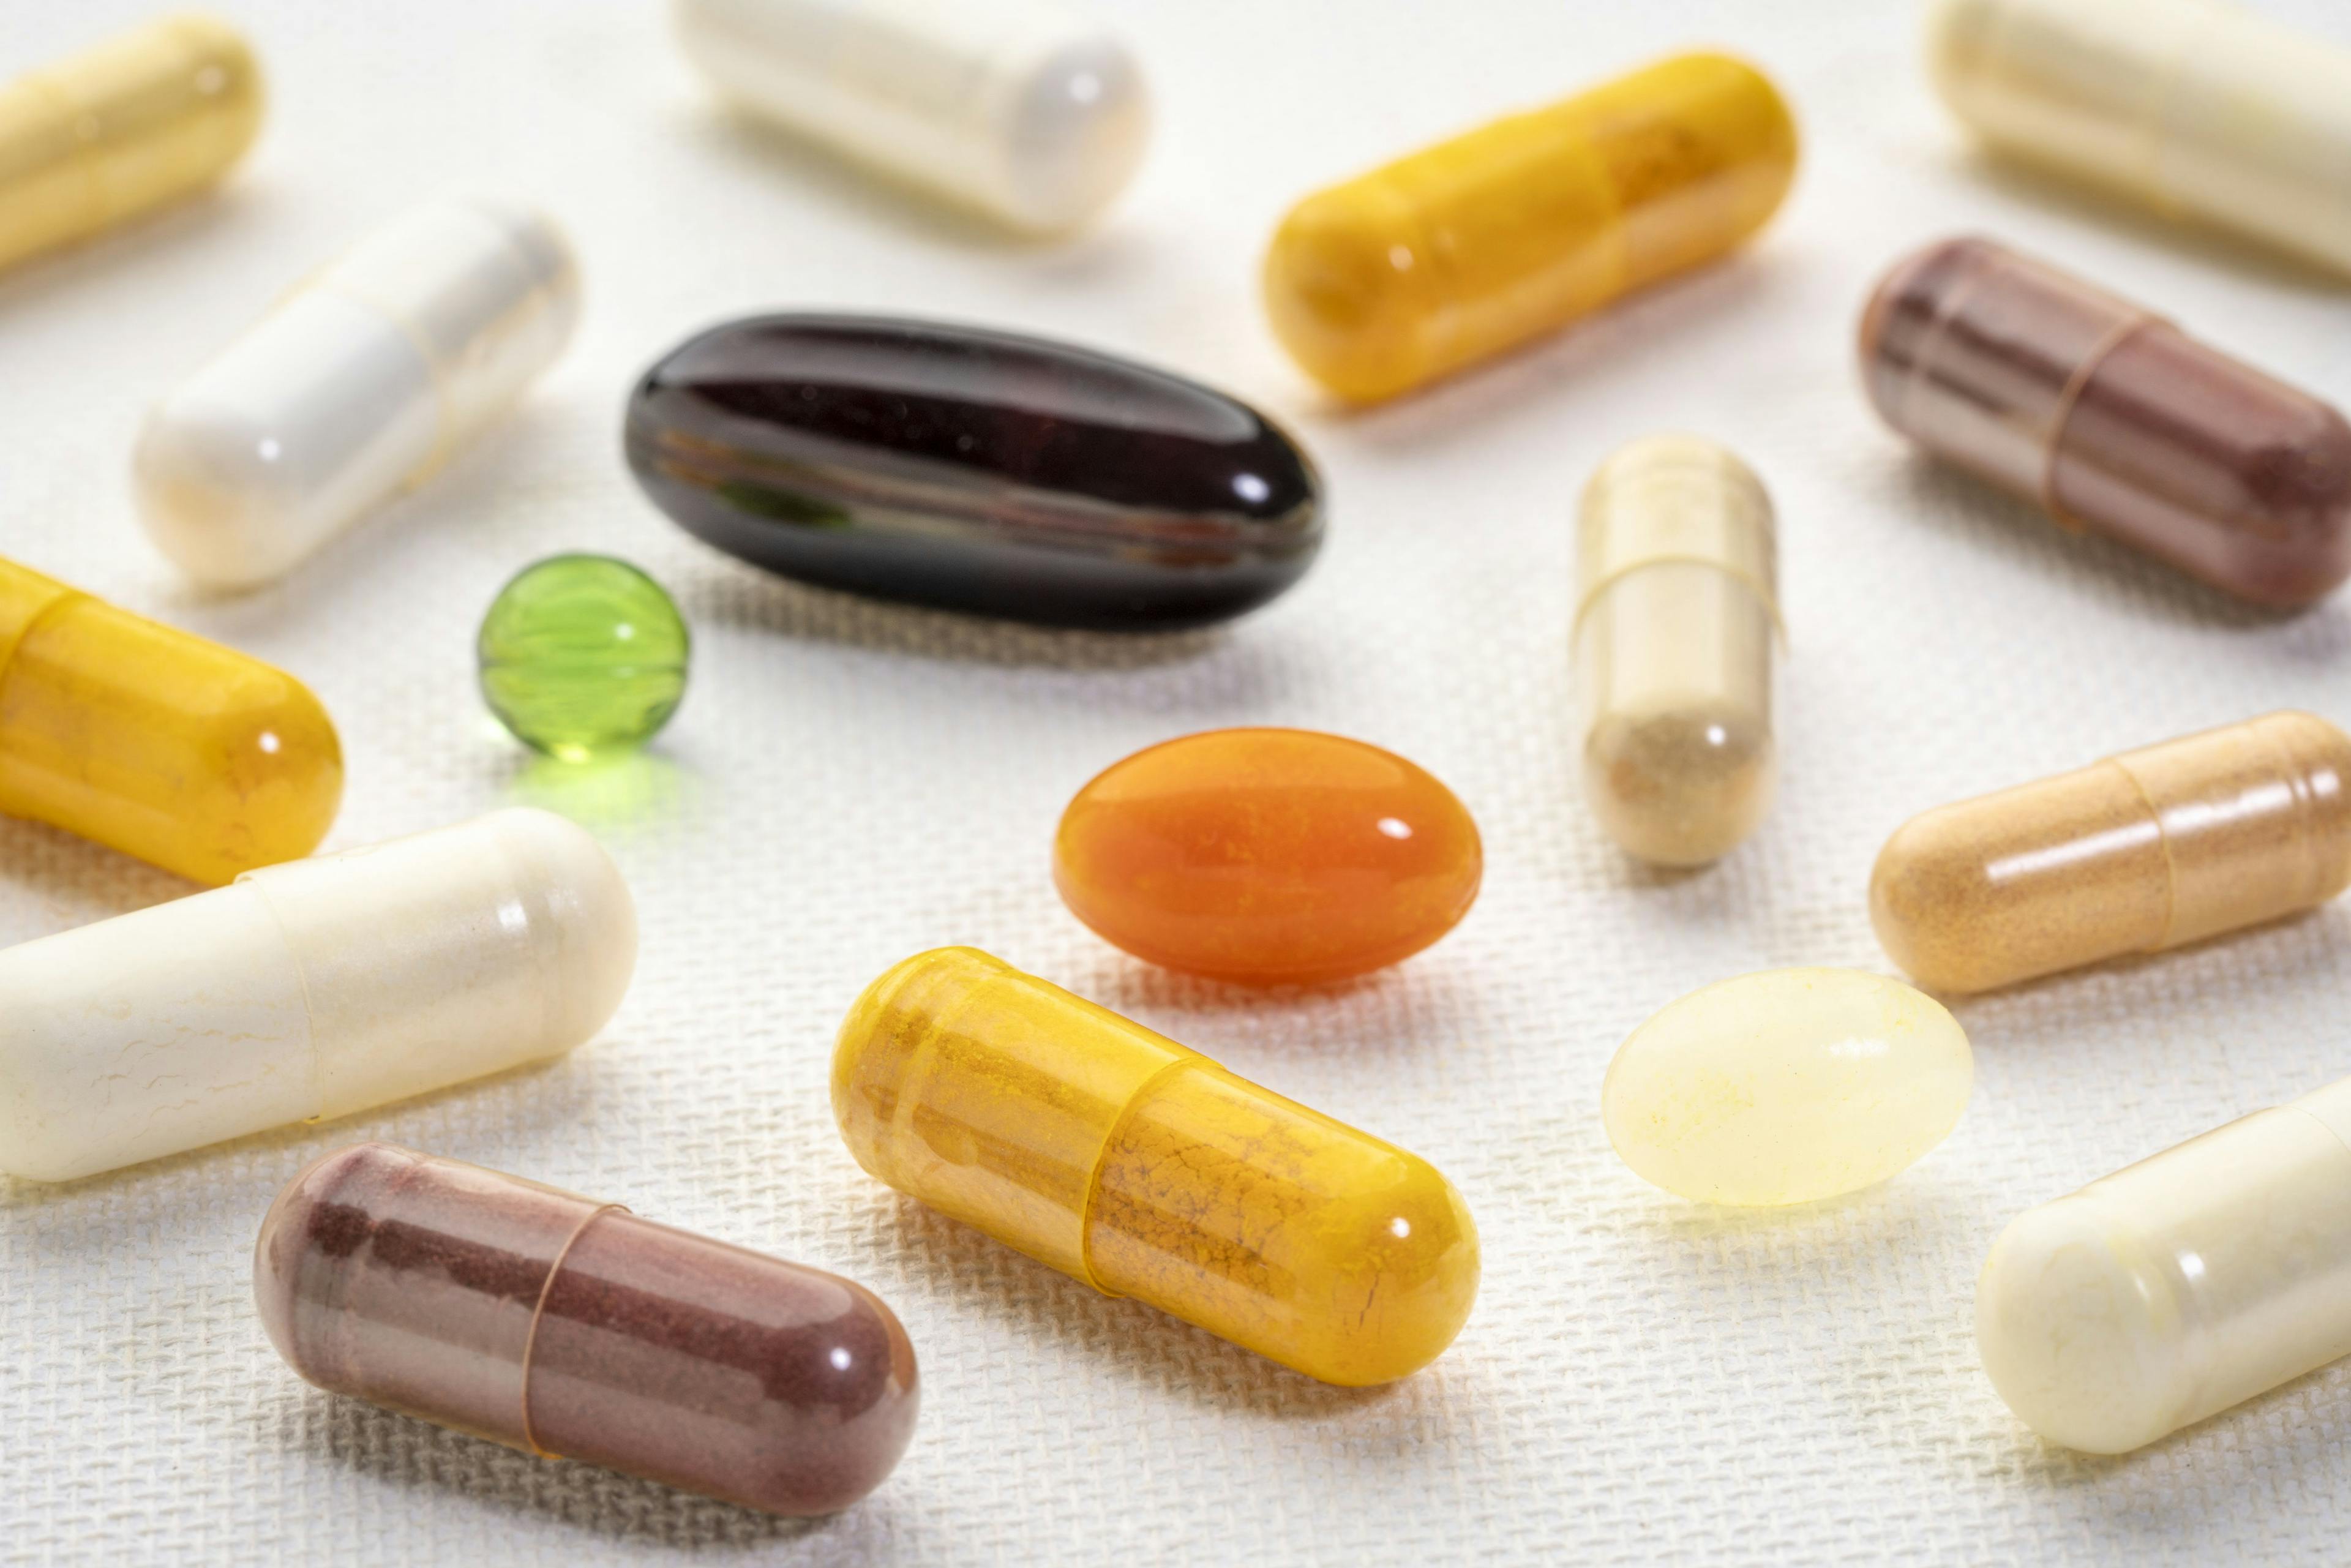 SPORT: Supplements Fail to Lower LDL-C in Primary Prevention Population